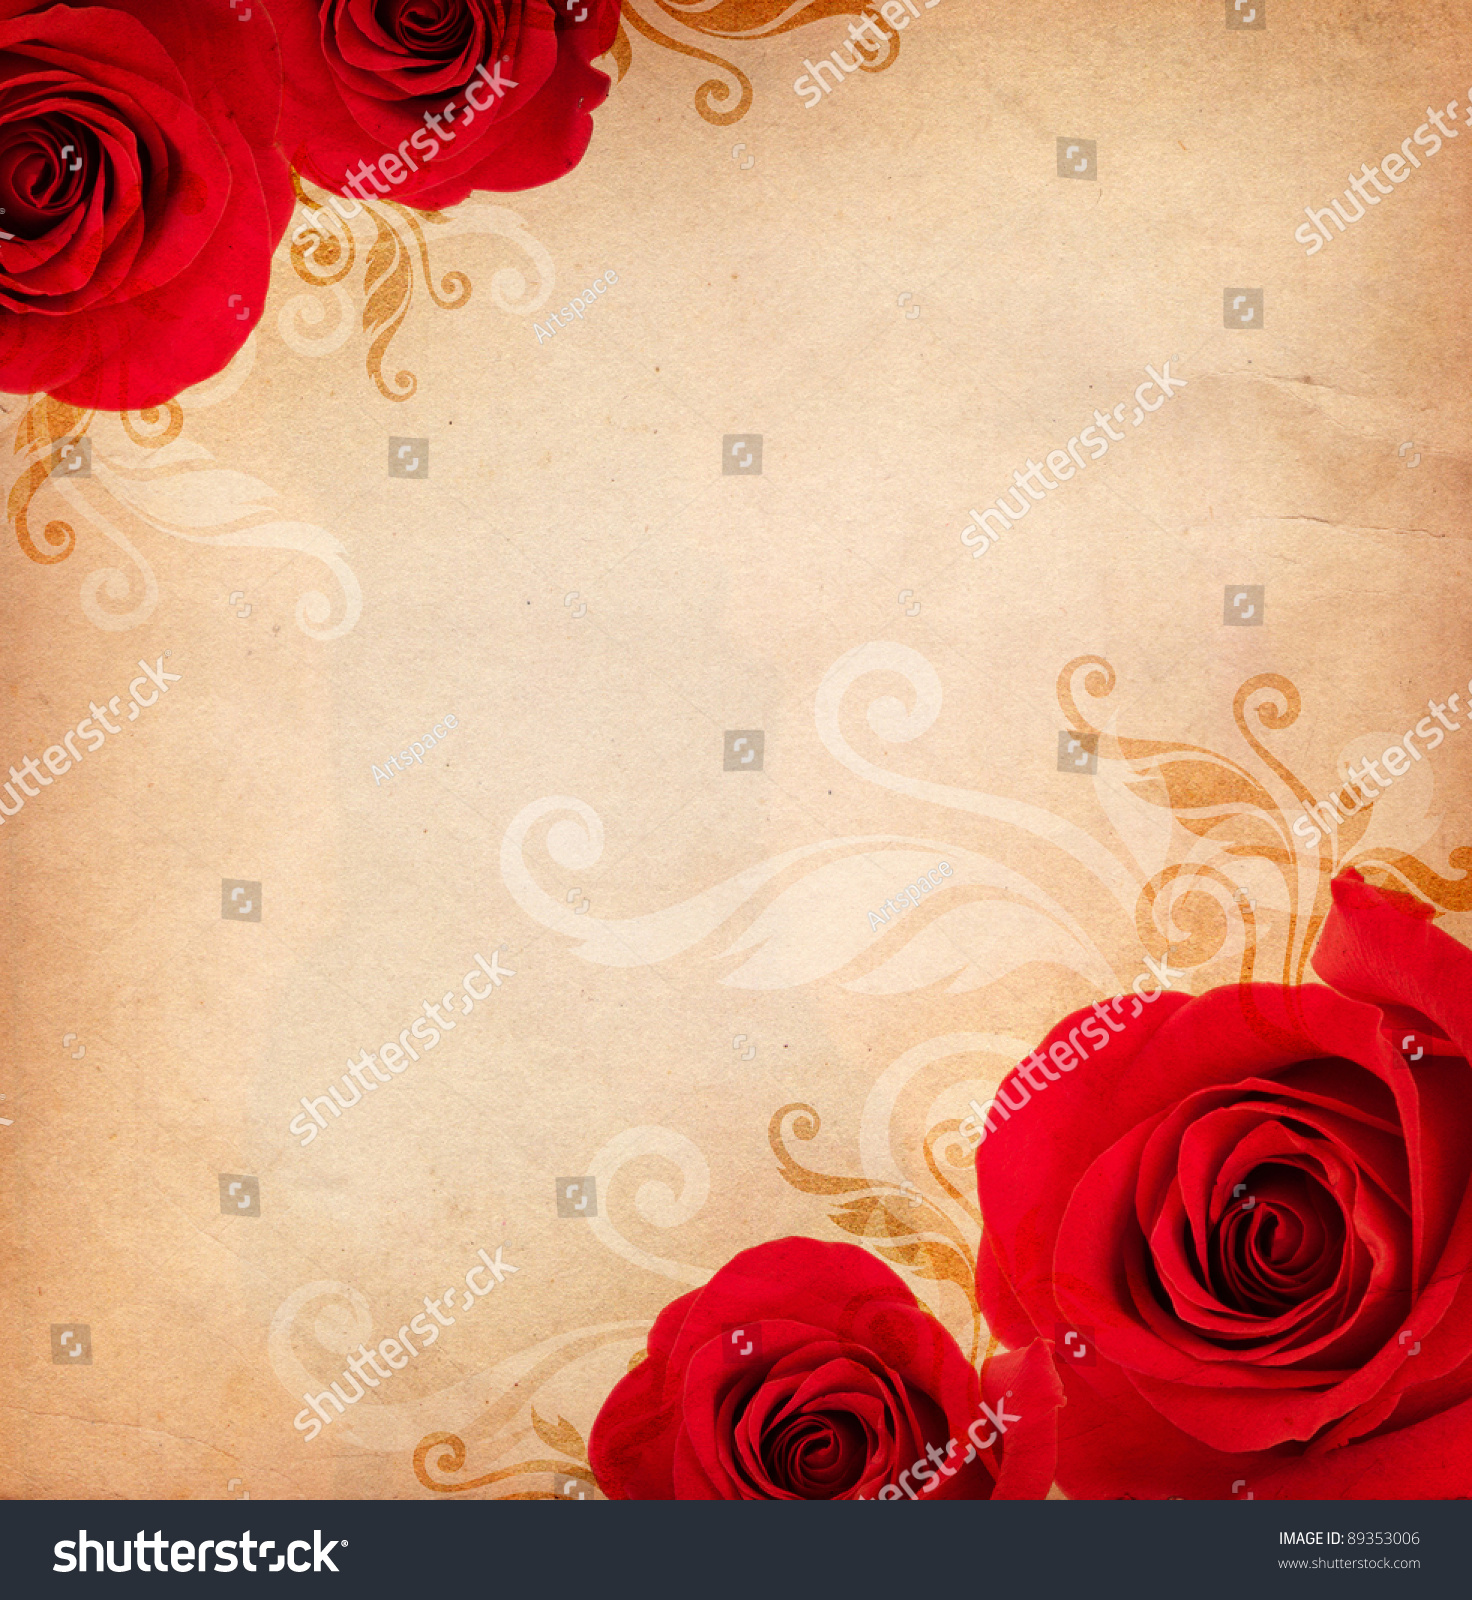 Vintage Background Red Roses Floral Ornament Stock Photo 89353006